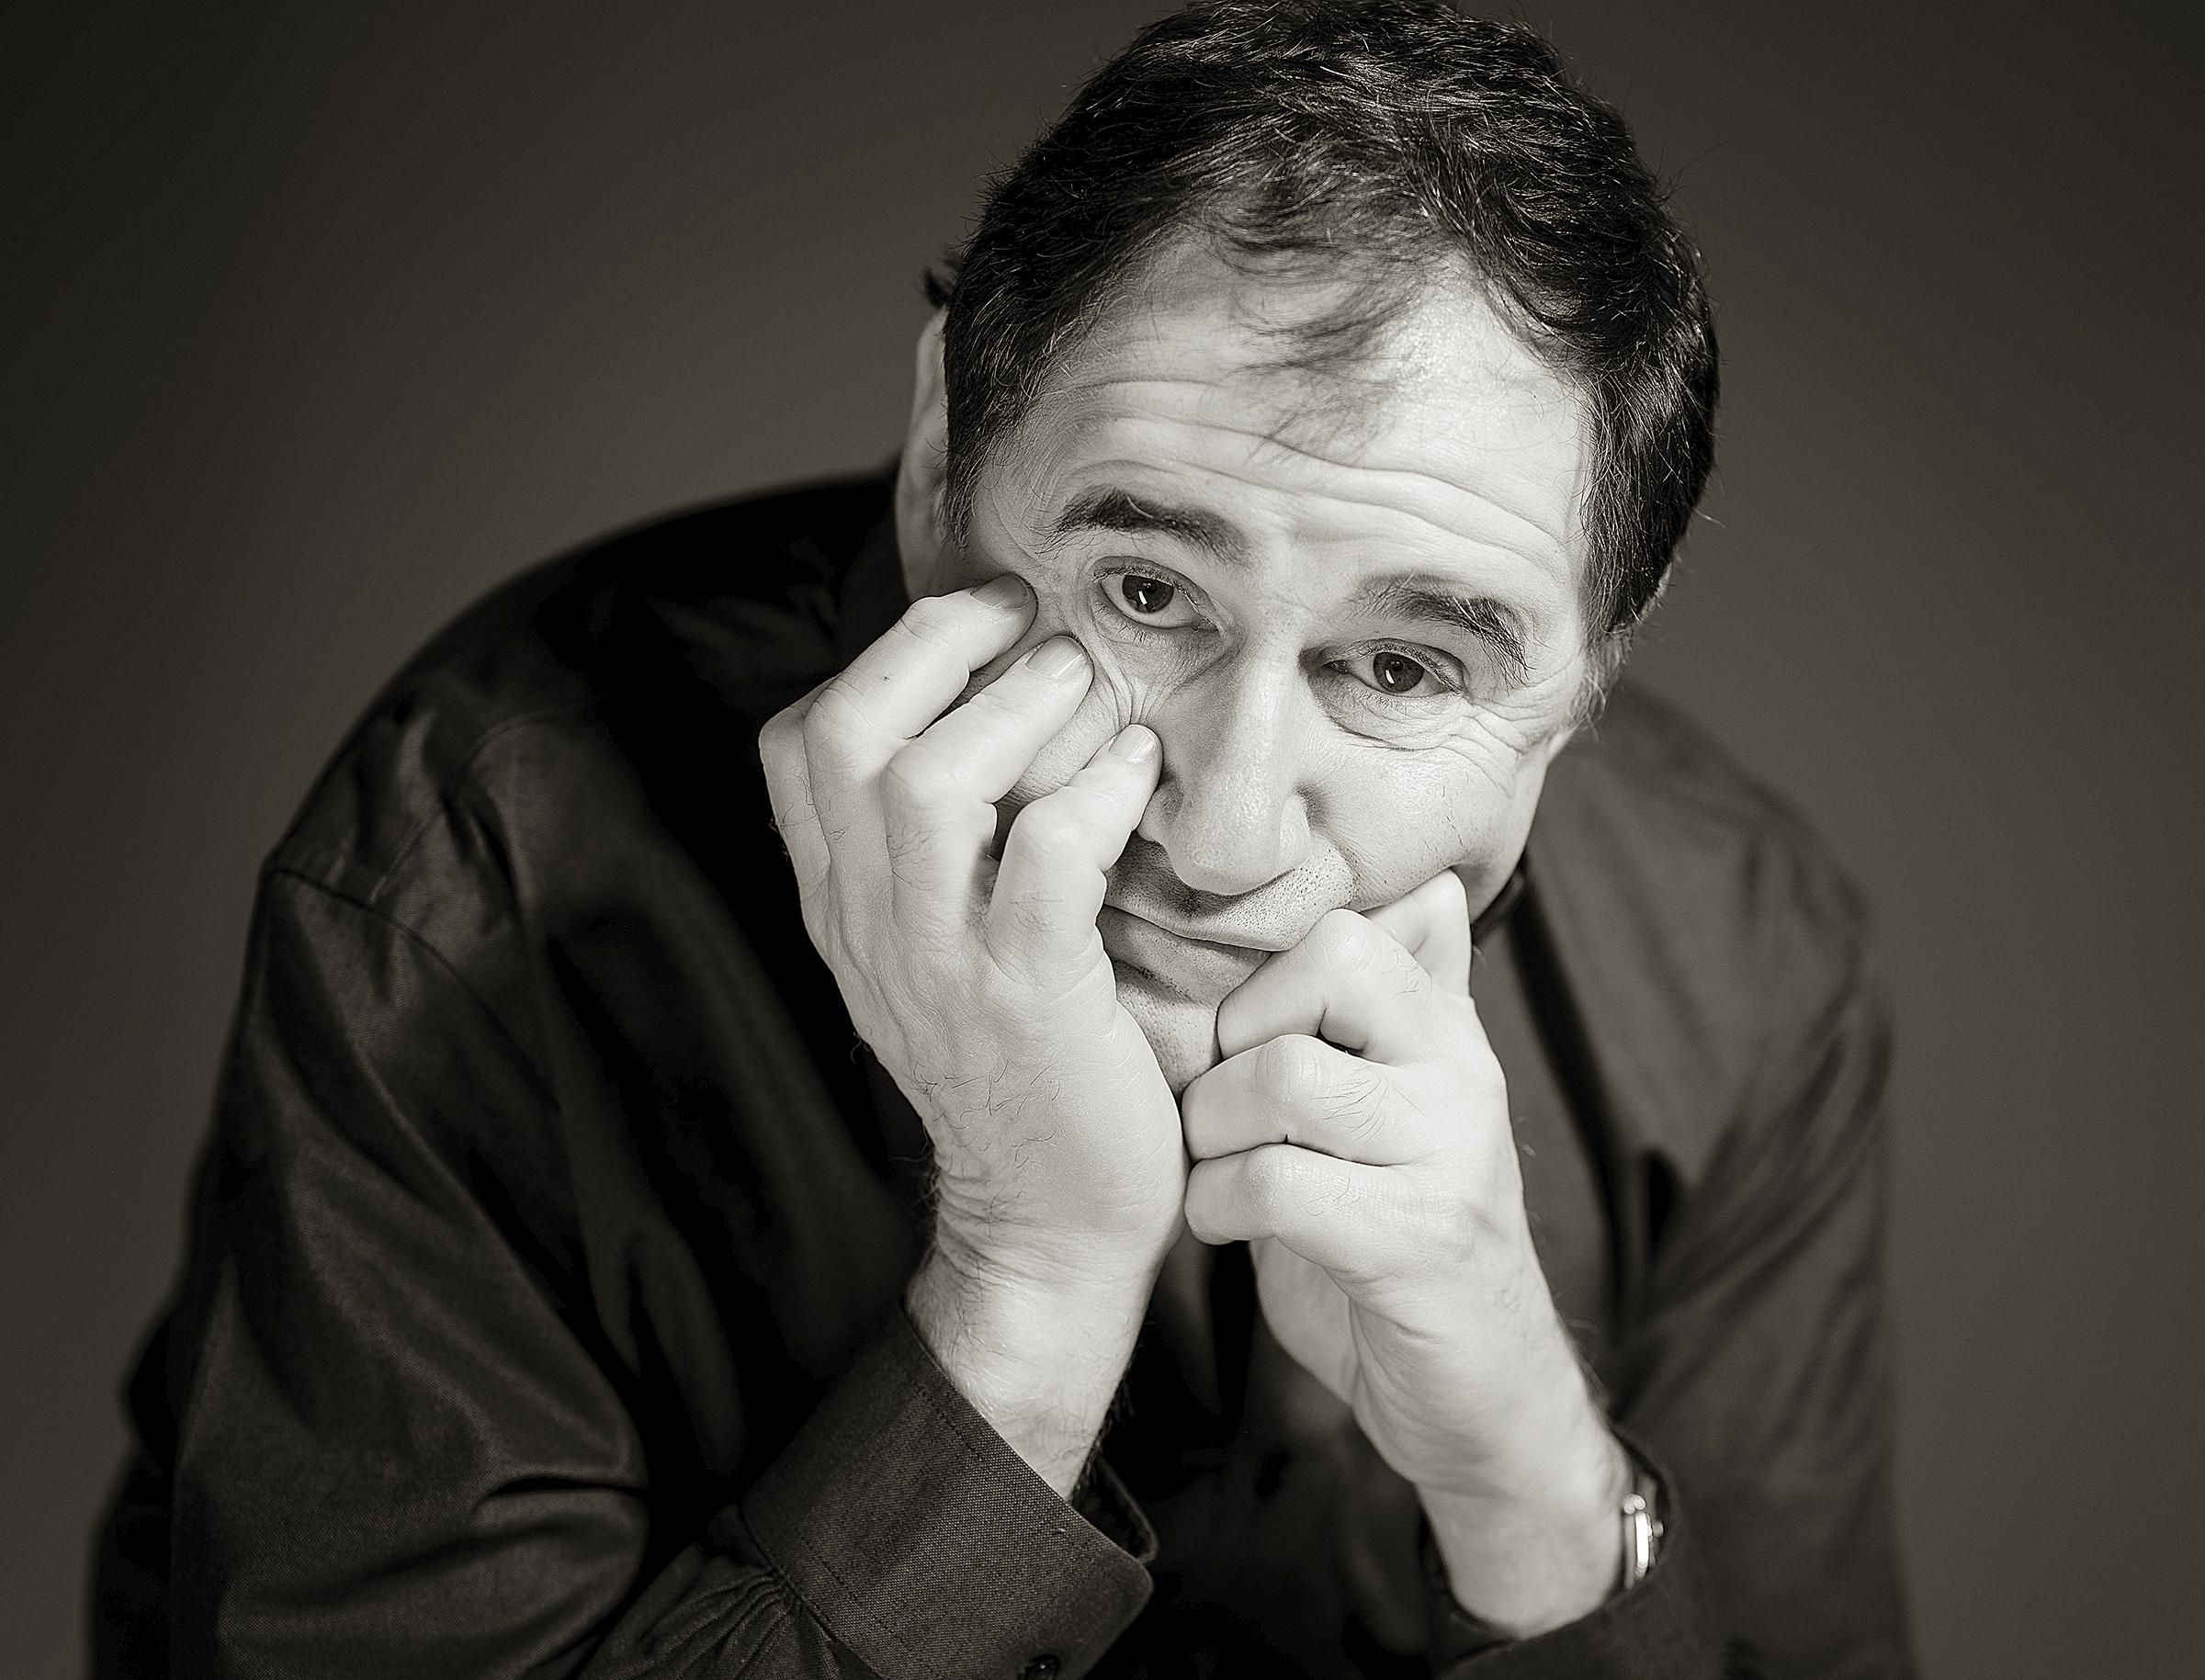 Actor Richard Kind poses with his chin in his hands looking pensive and comical.